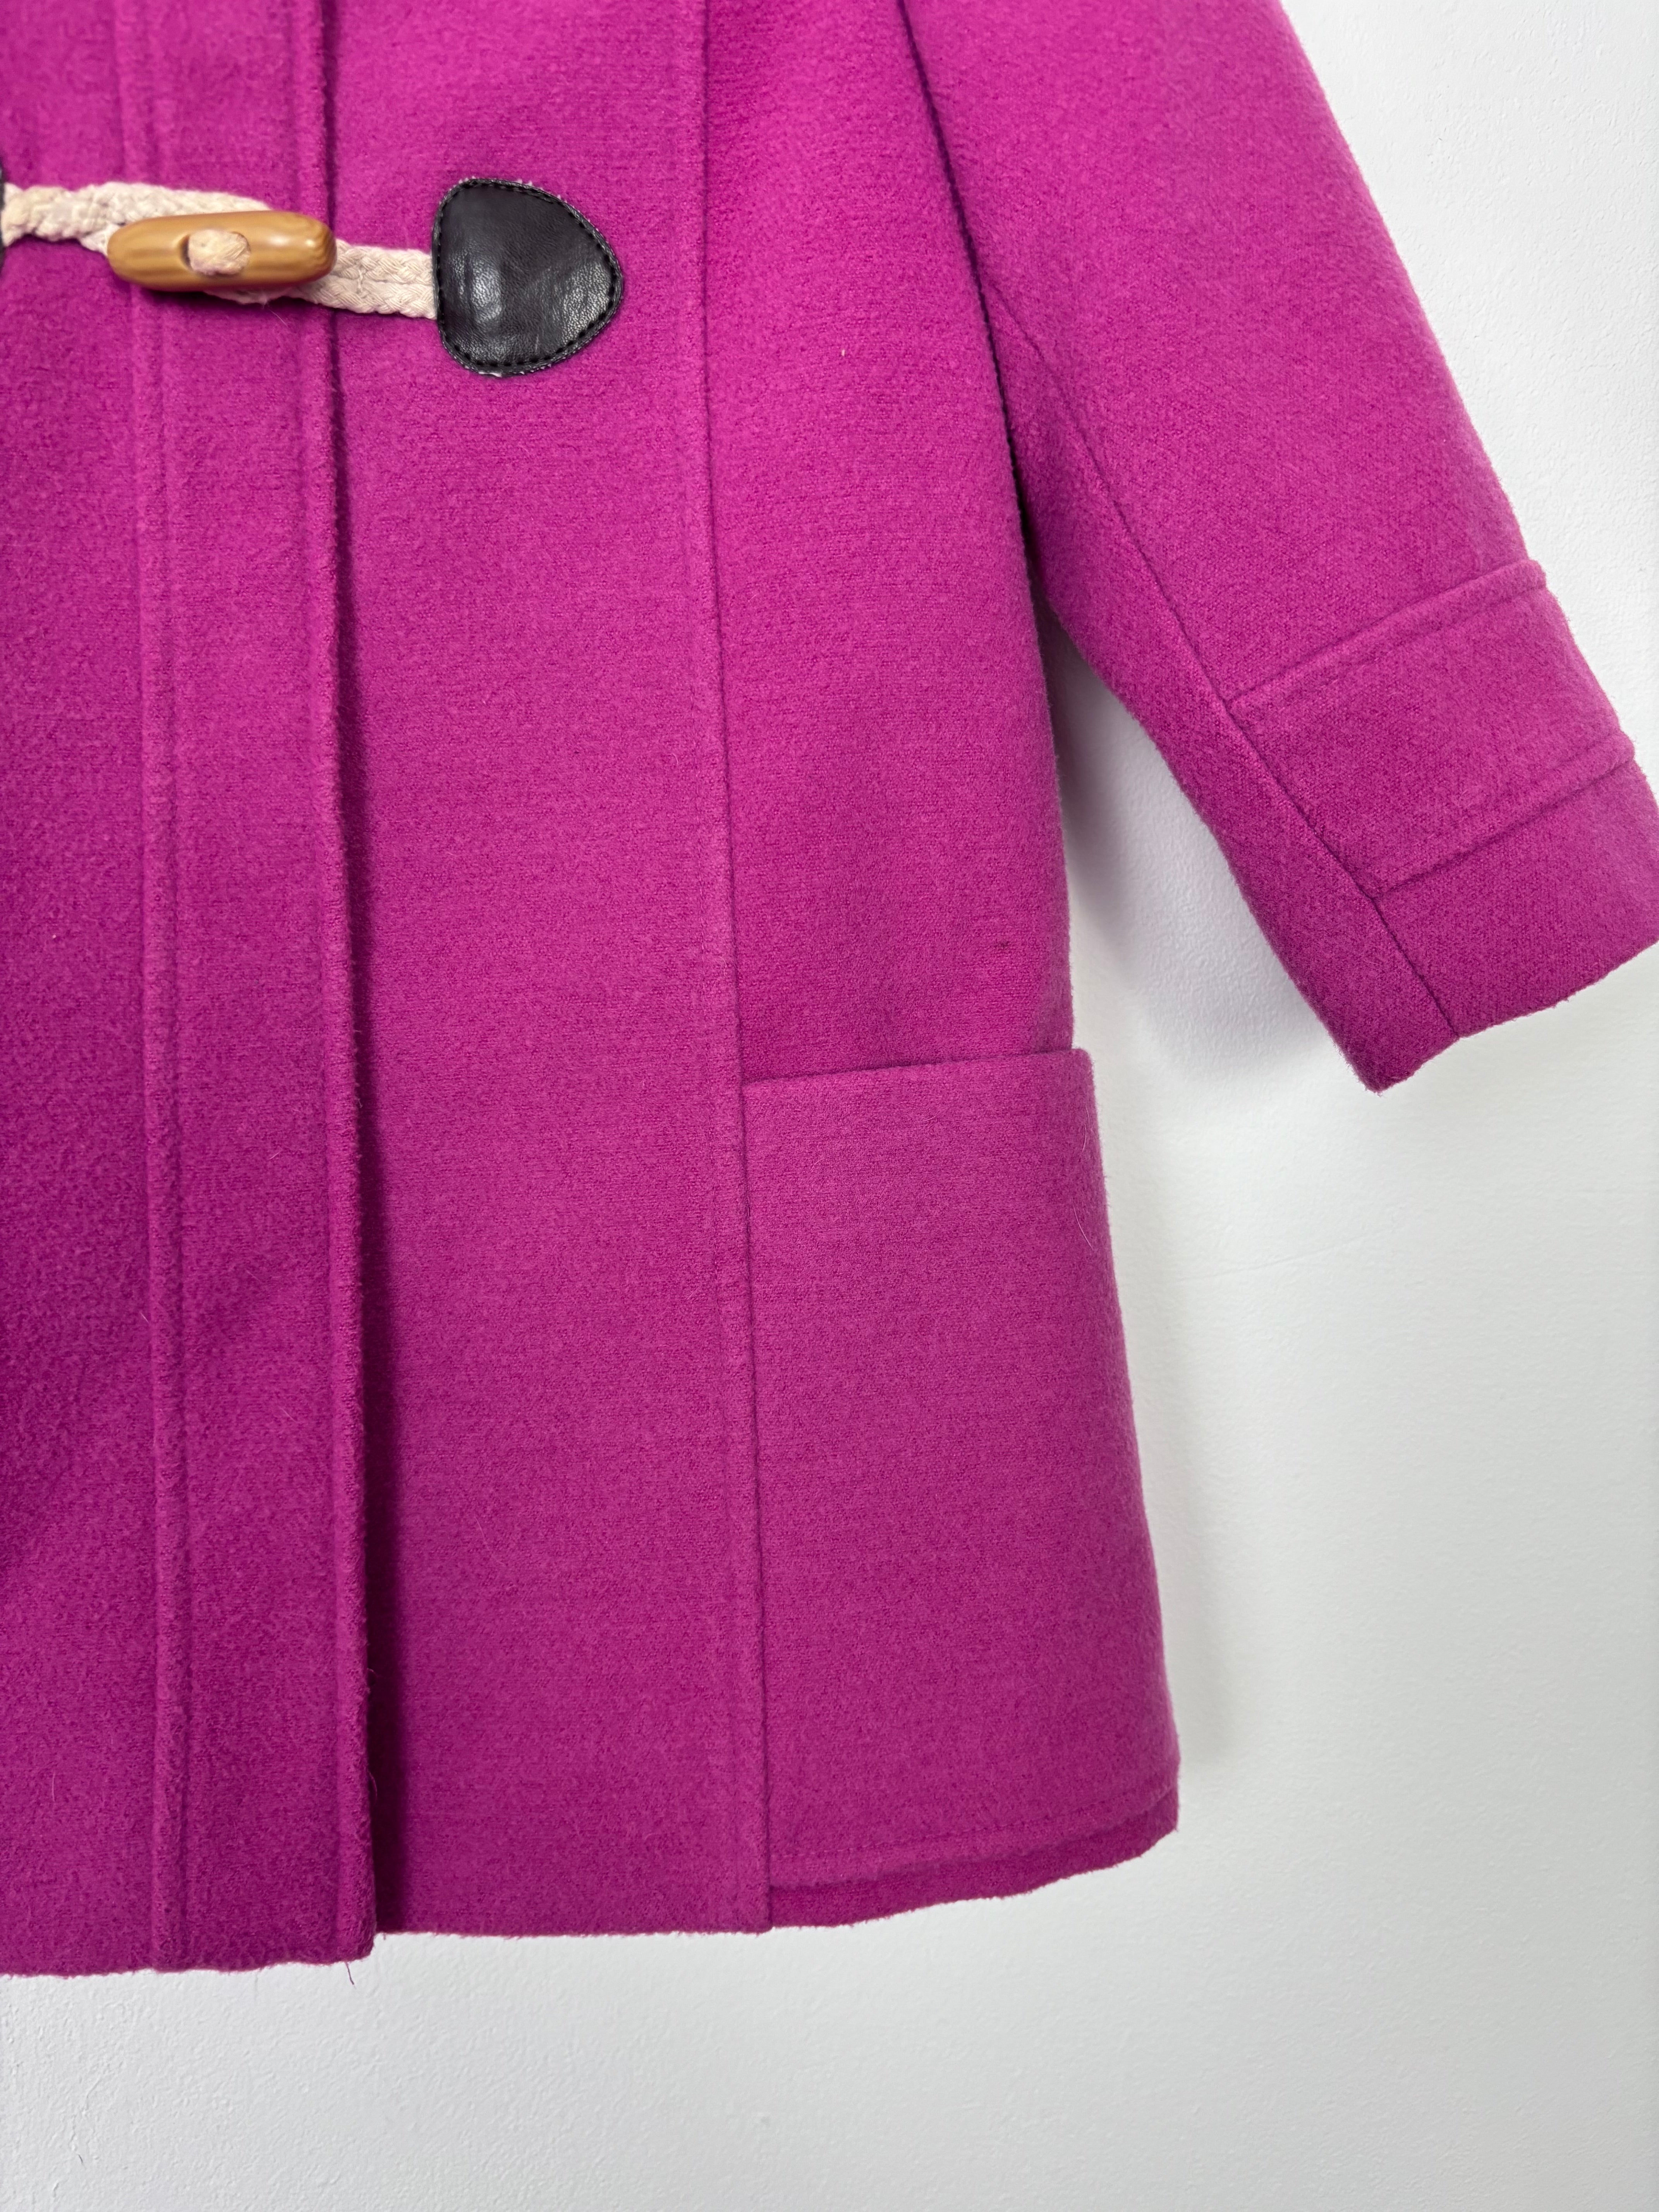 John Lewis 2 Years-Coats-Second Snuggle Preloved